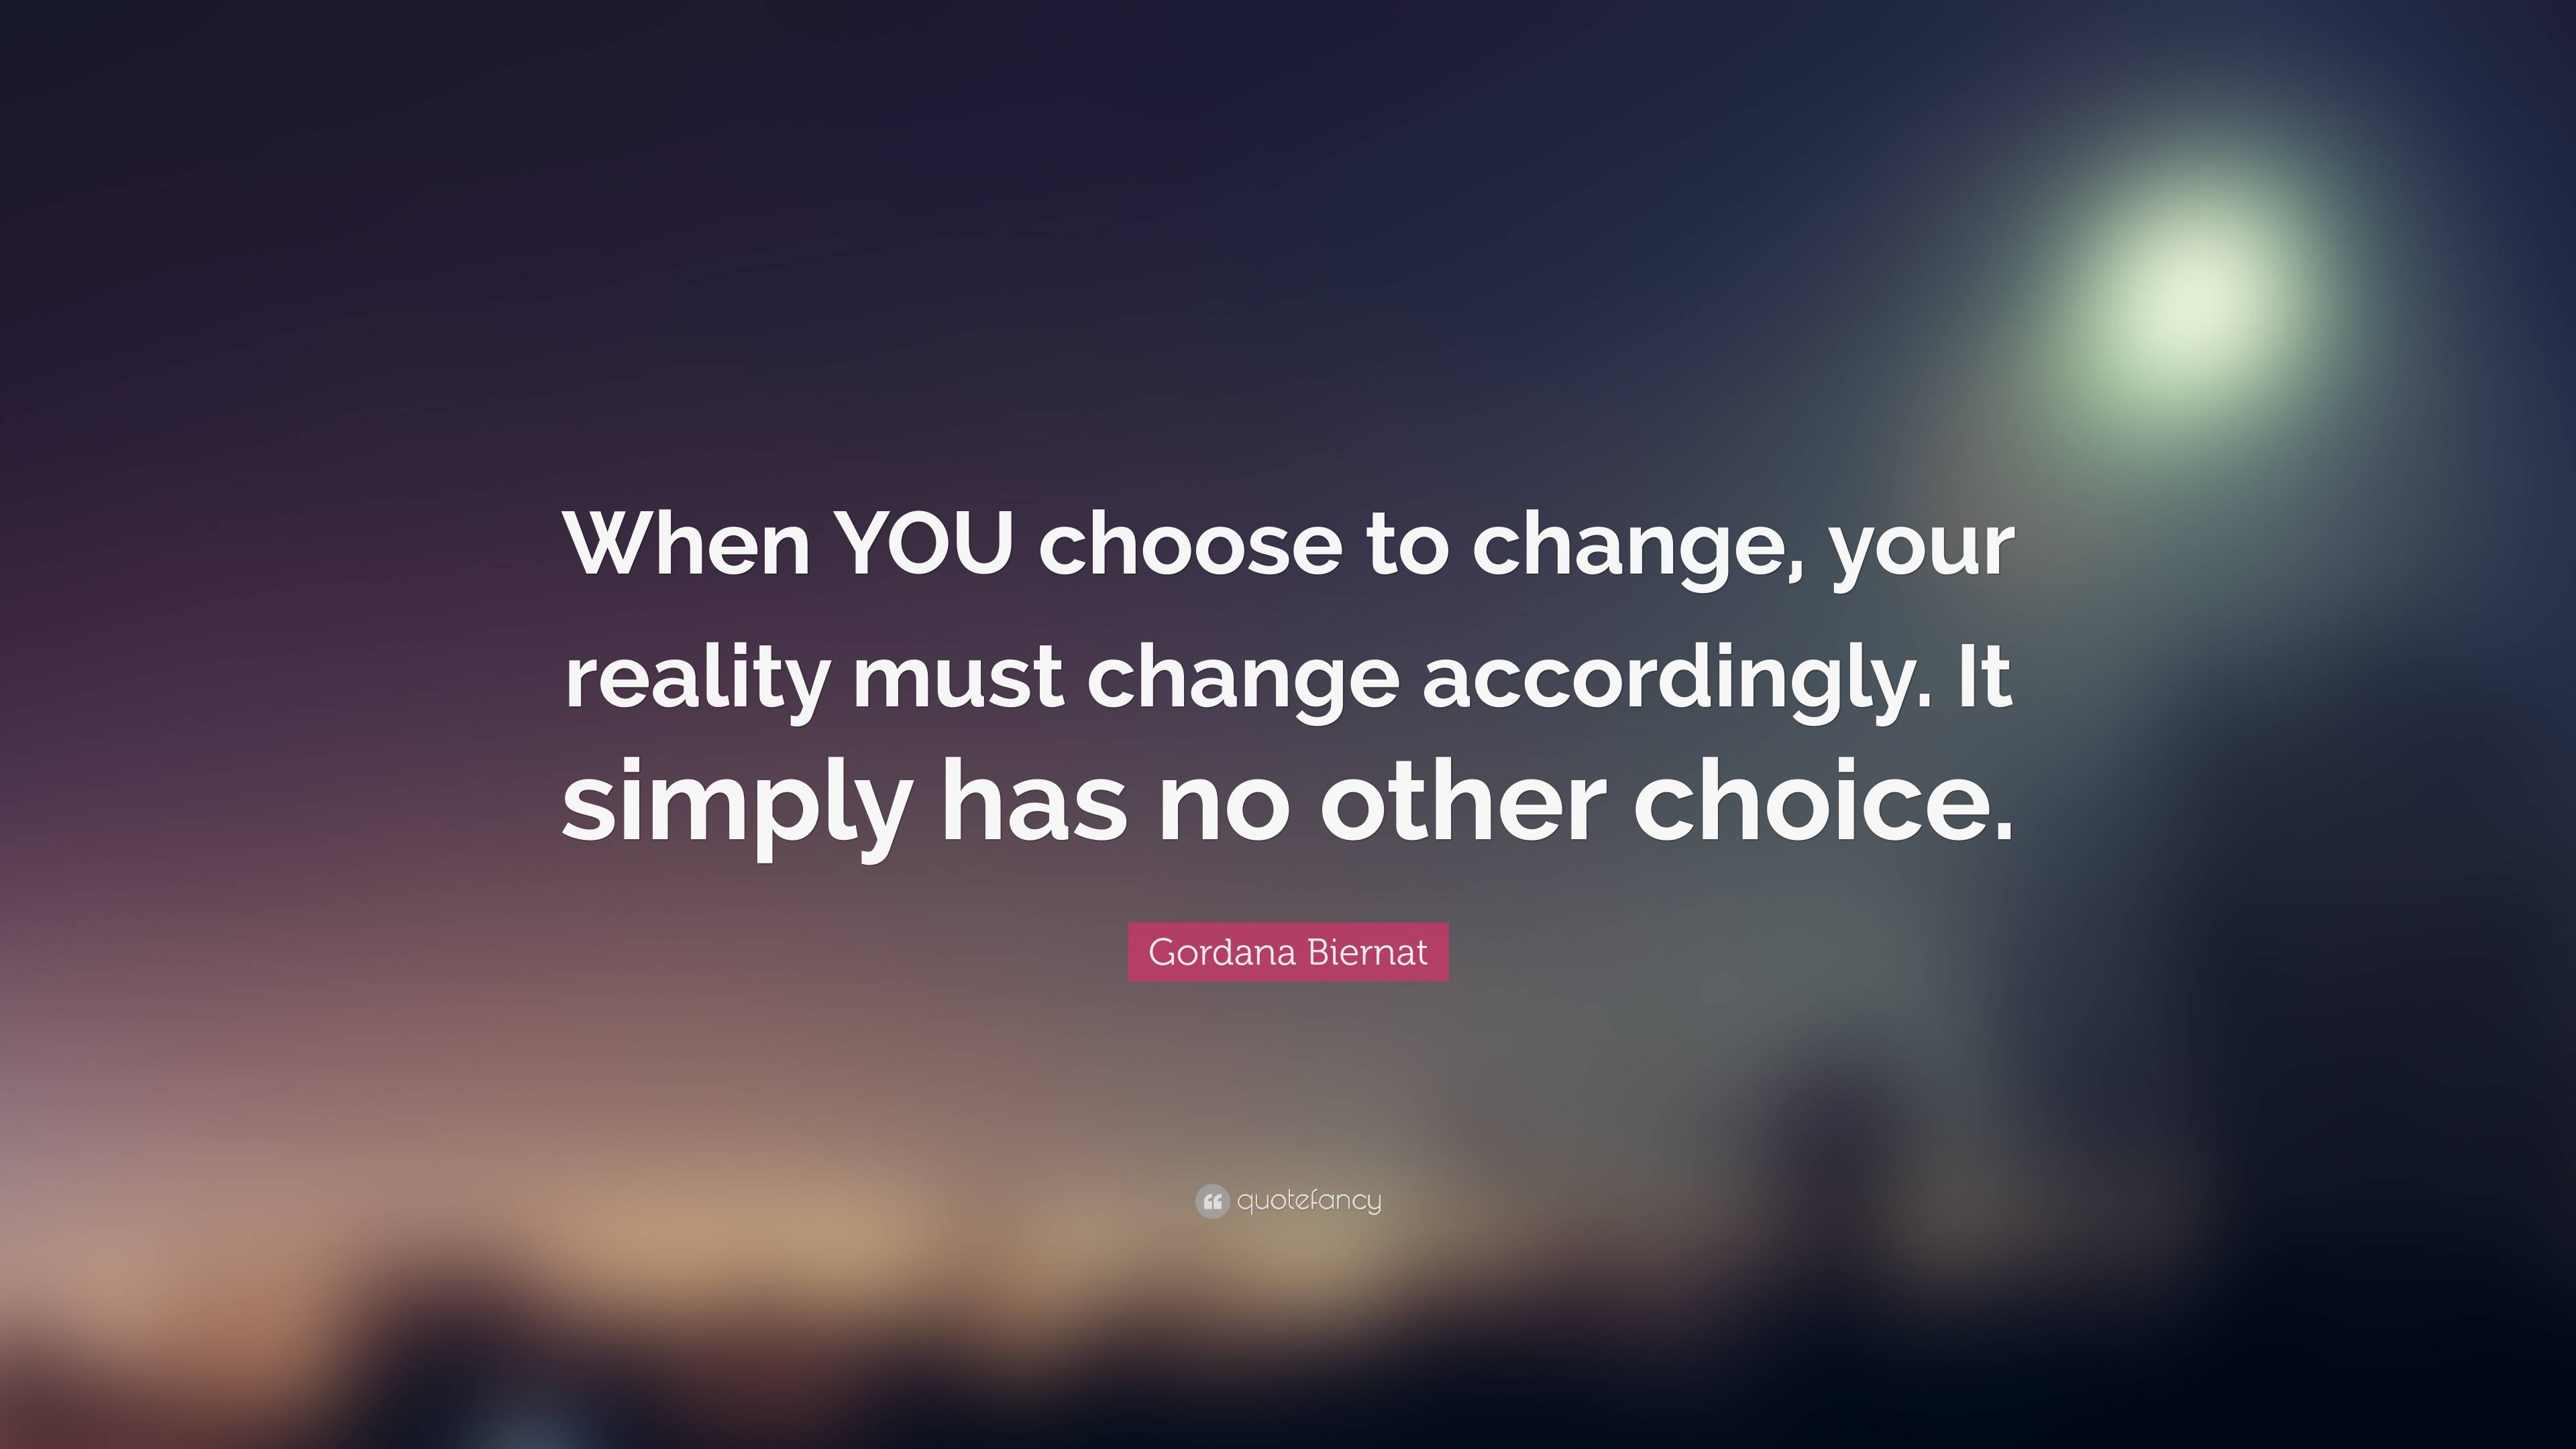 Gordana Biernat Quote: “When YOU choose to change, your reality must ...